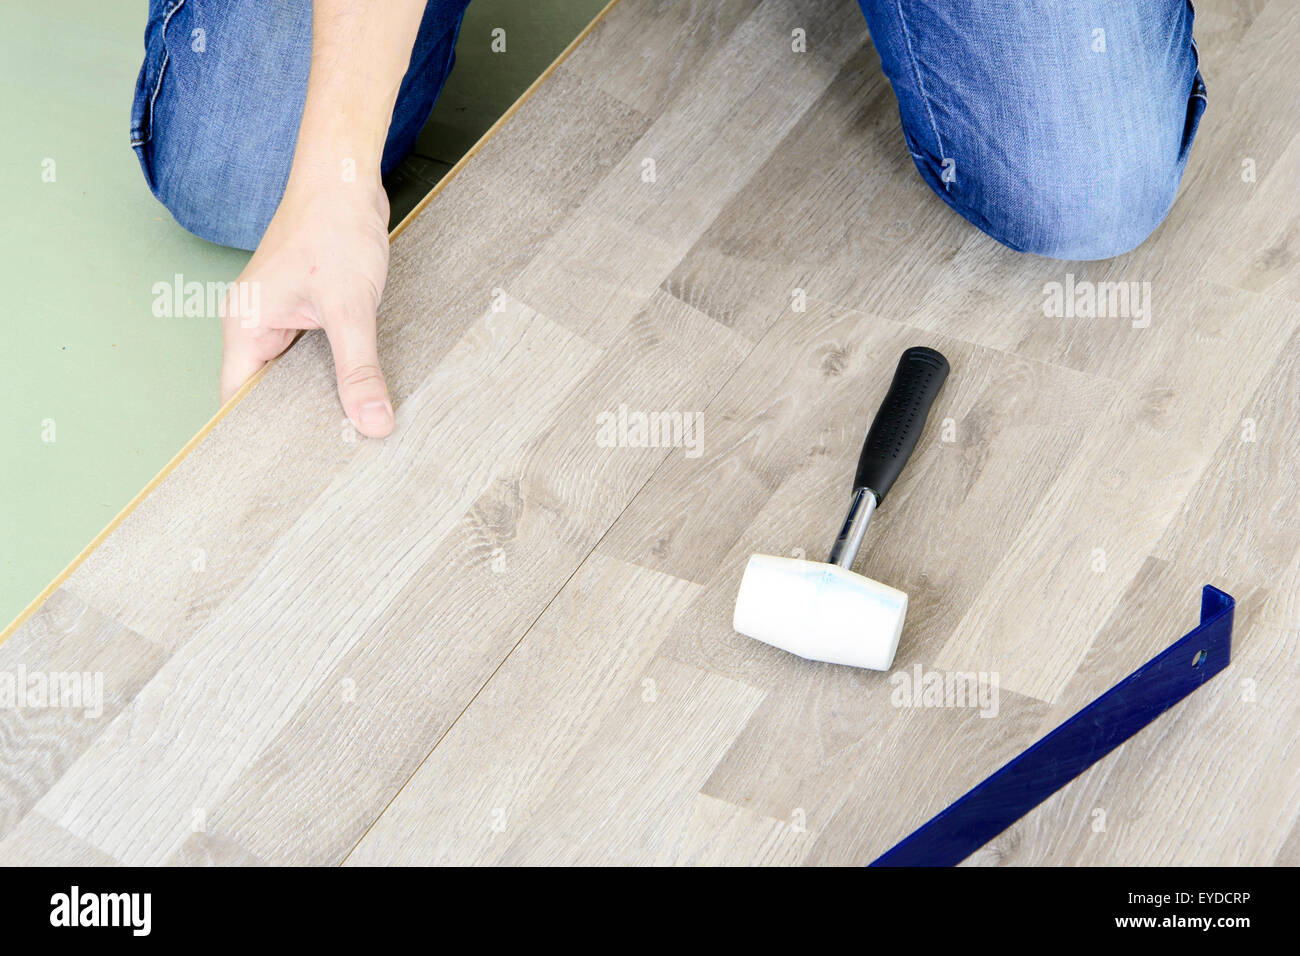 Man With Tools To Laying Laminate Stock Photo 85732634 Alamy